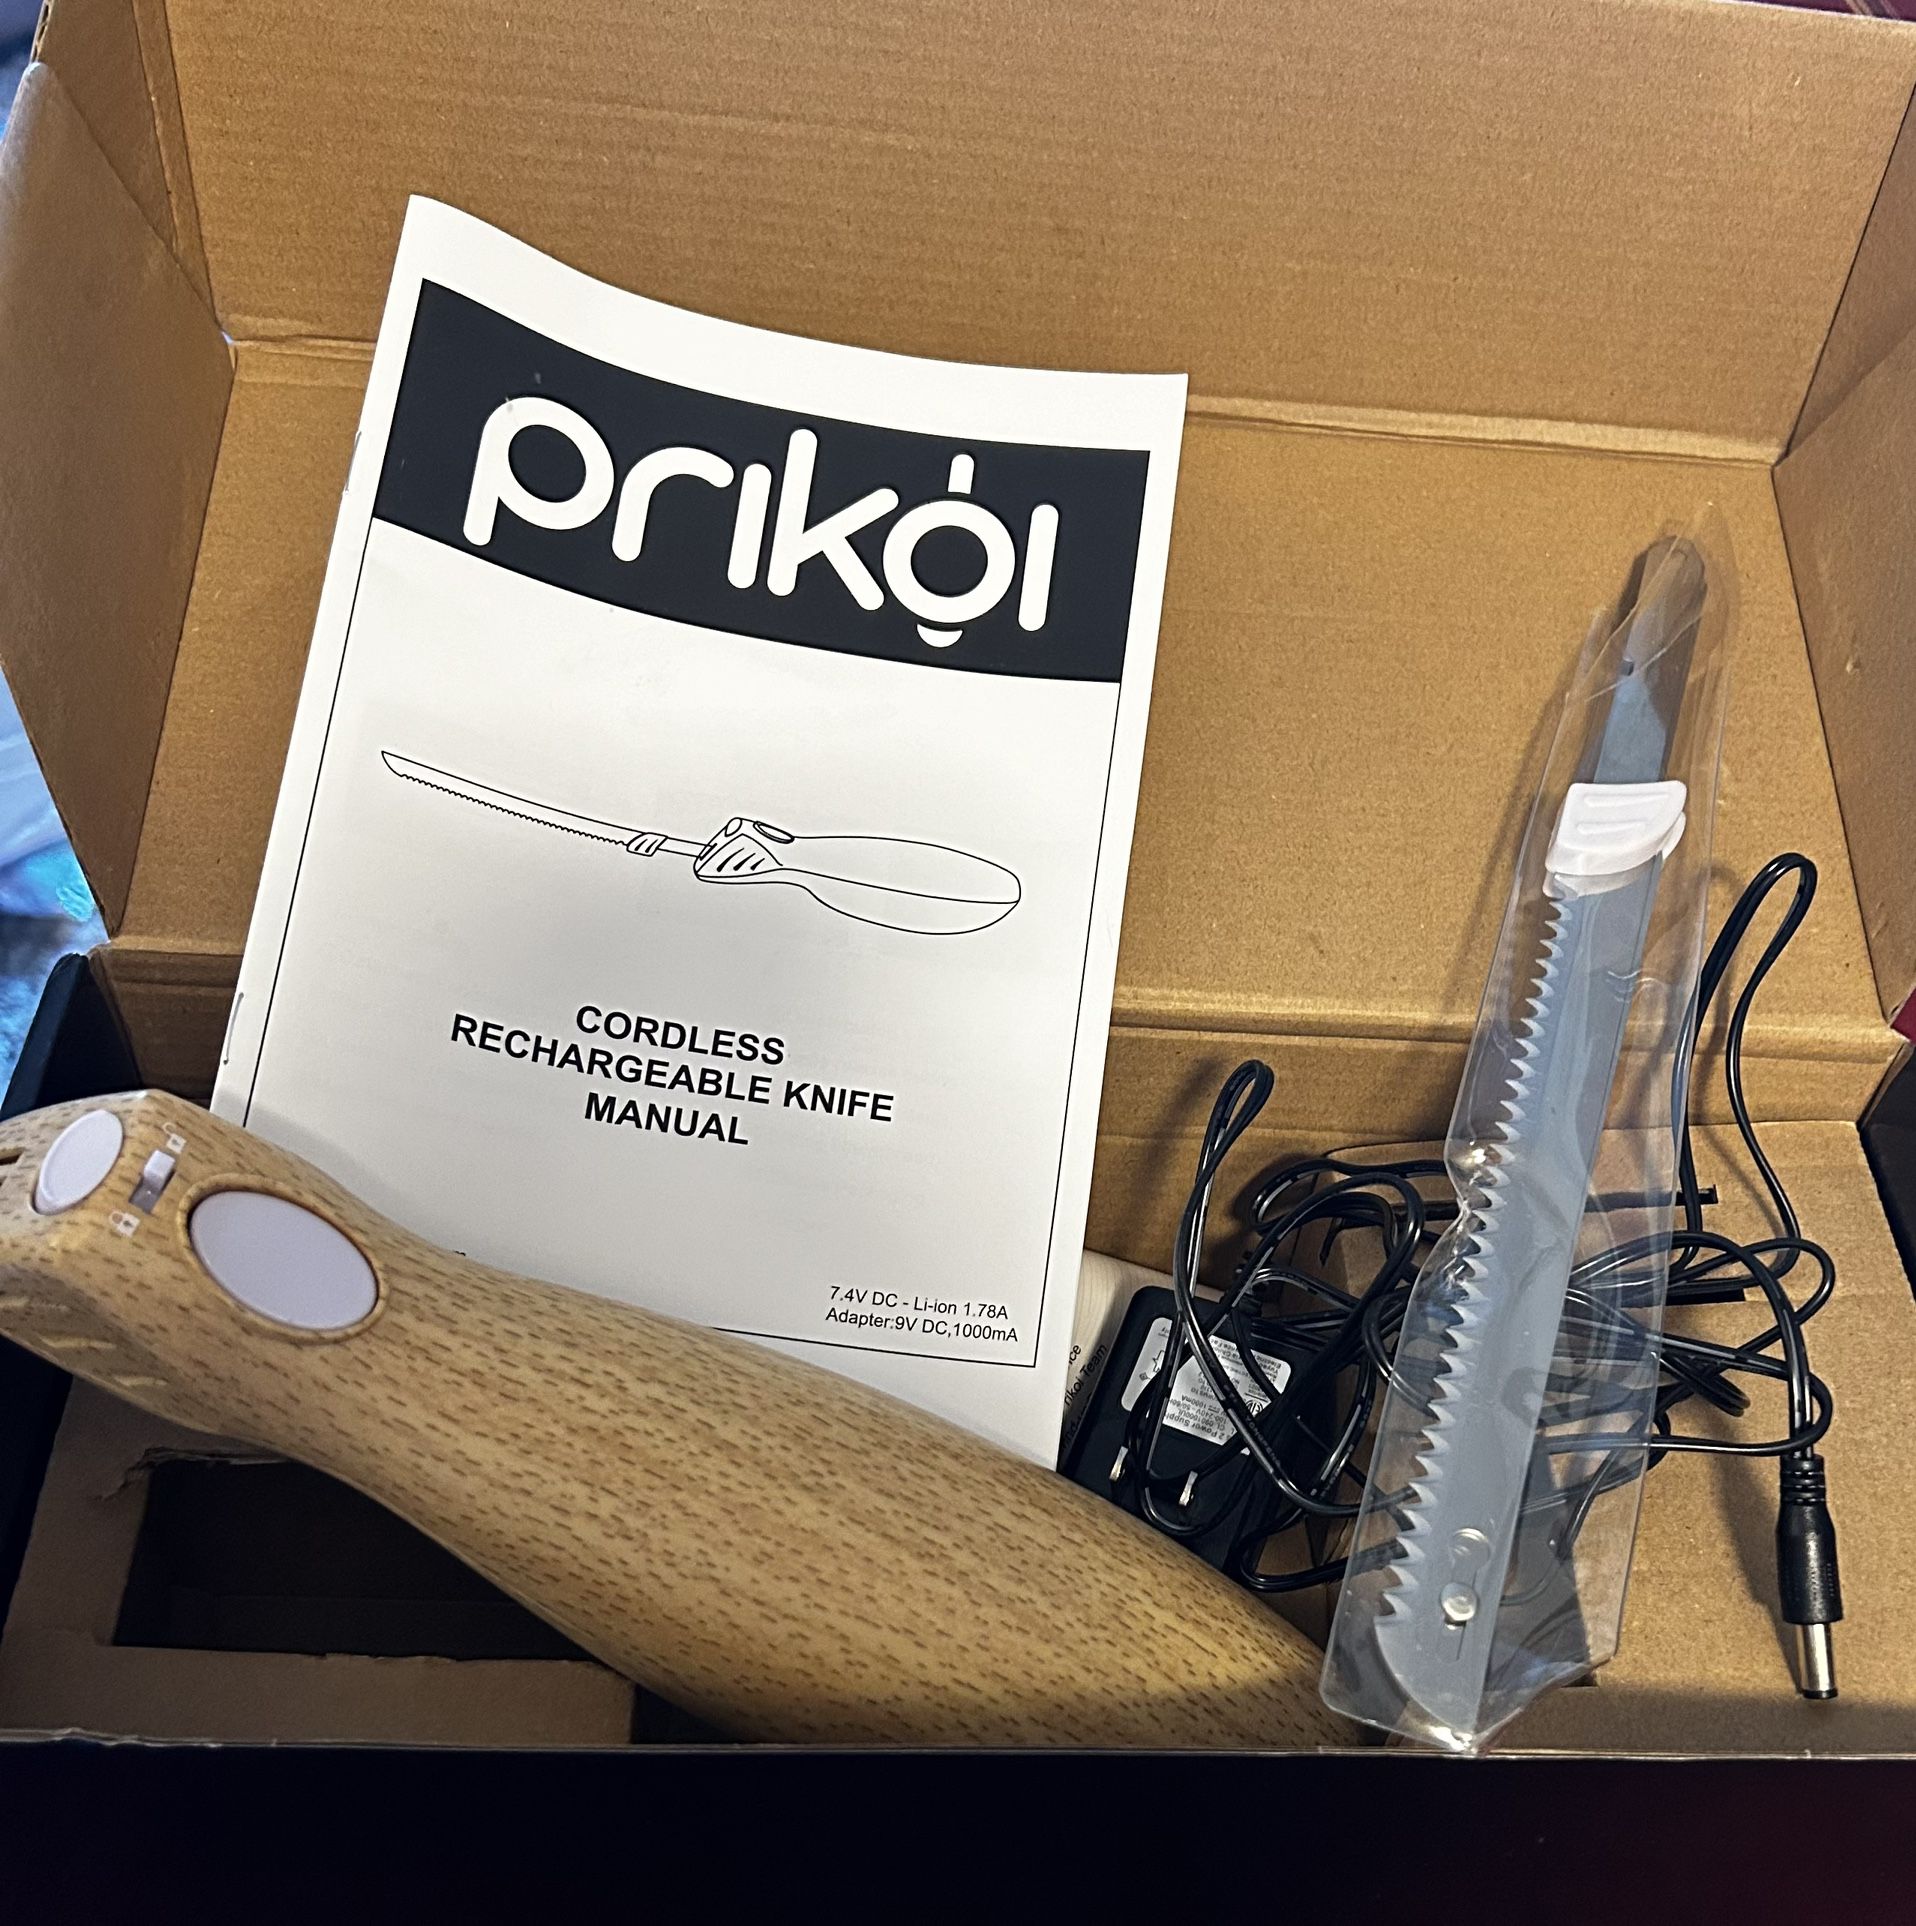 Rechargeable prokoi Knife